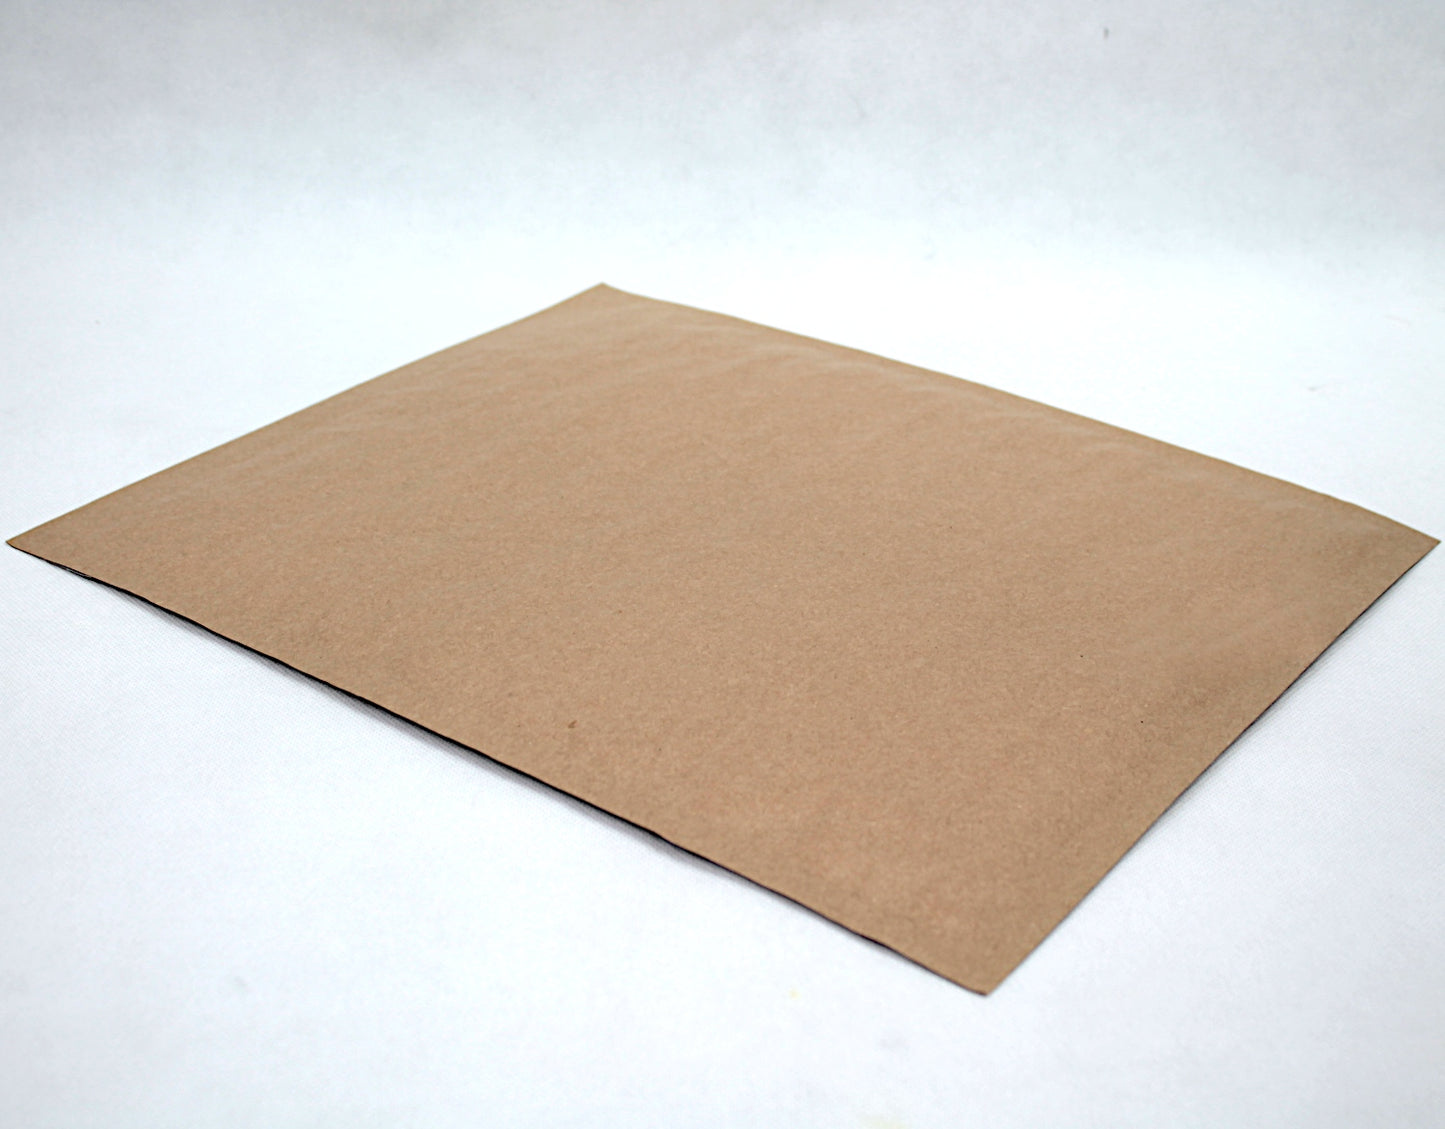 365x285mm Recyclable Padded Envelopes - Pack of 50